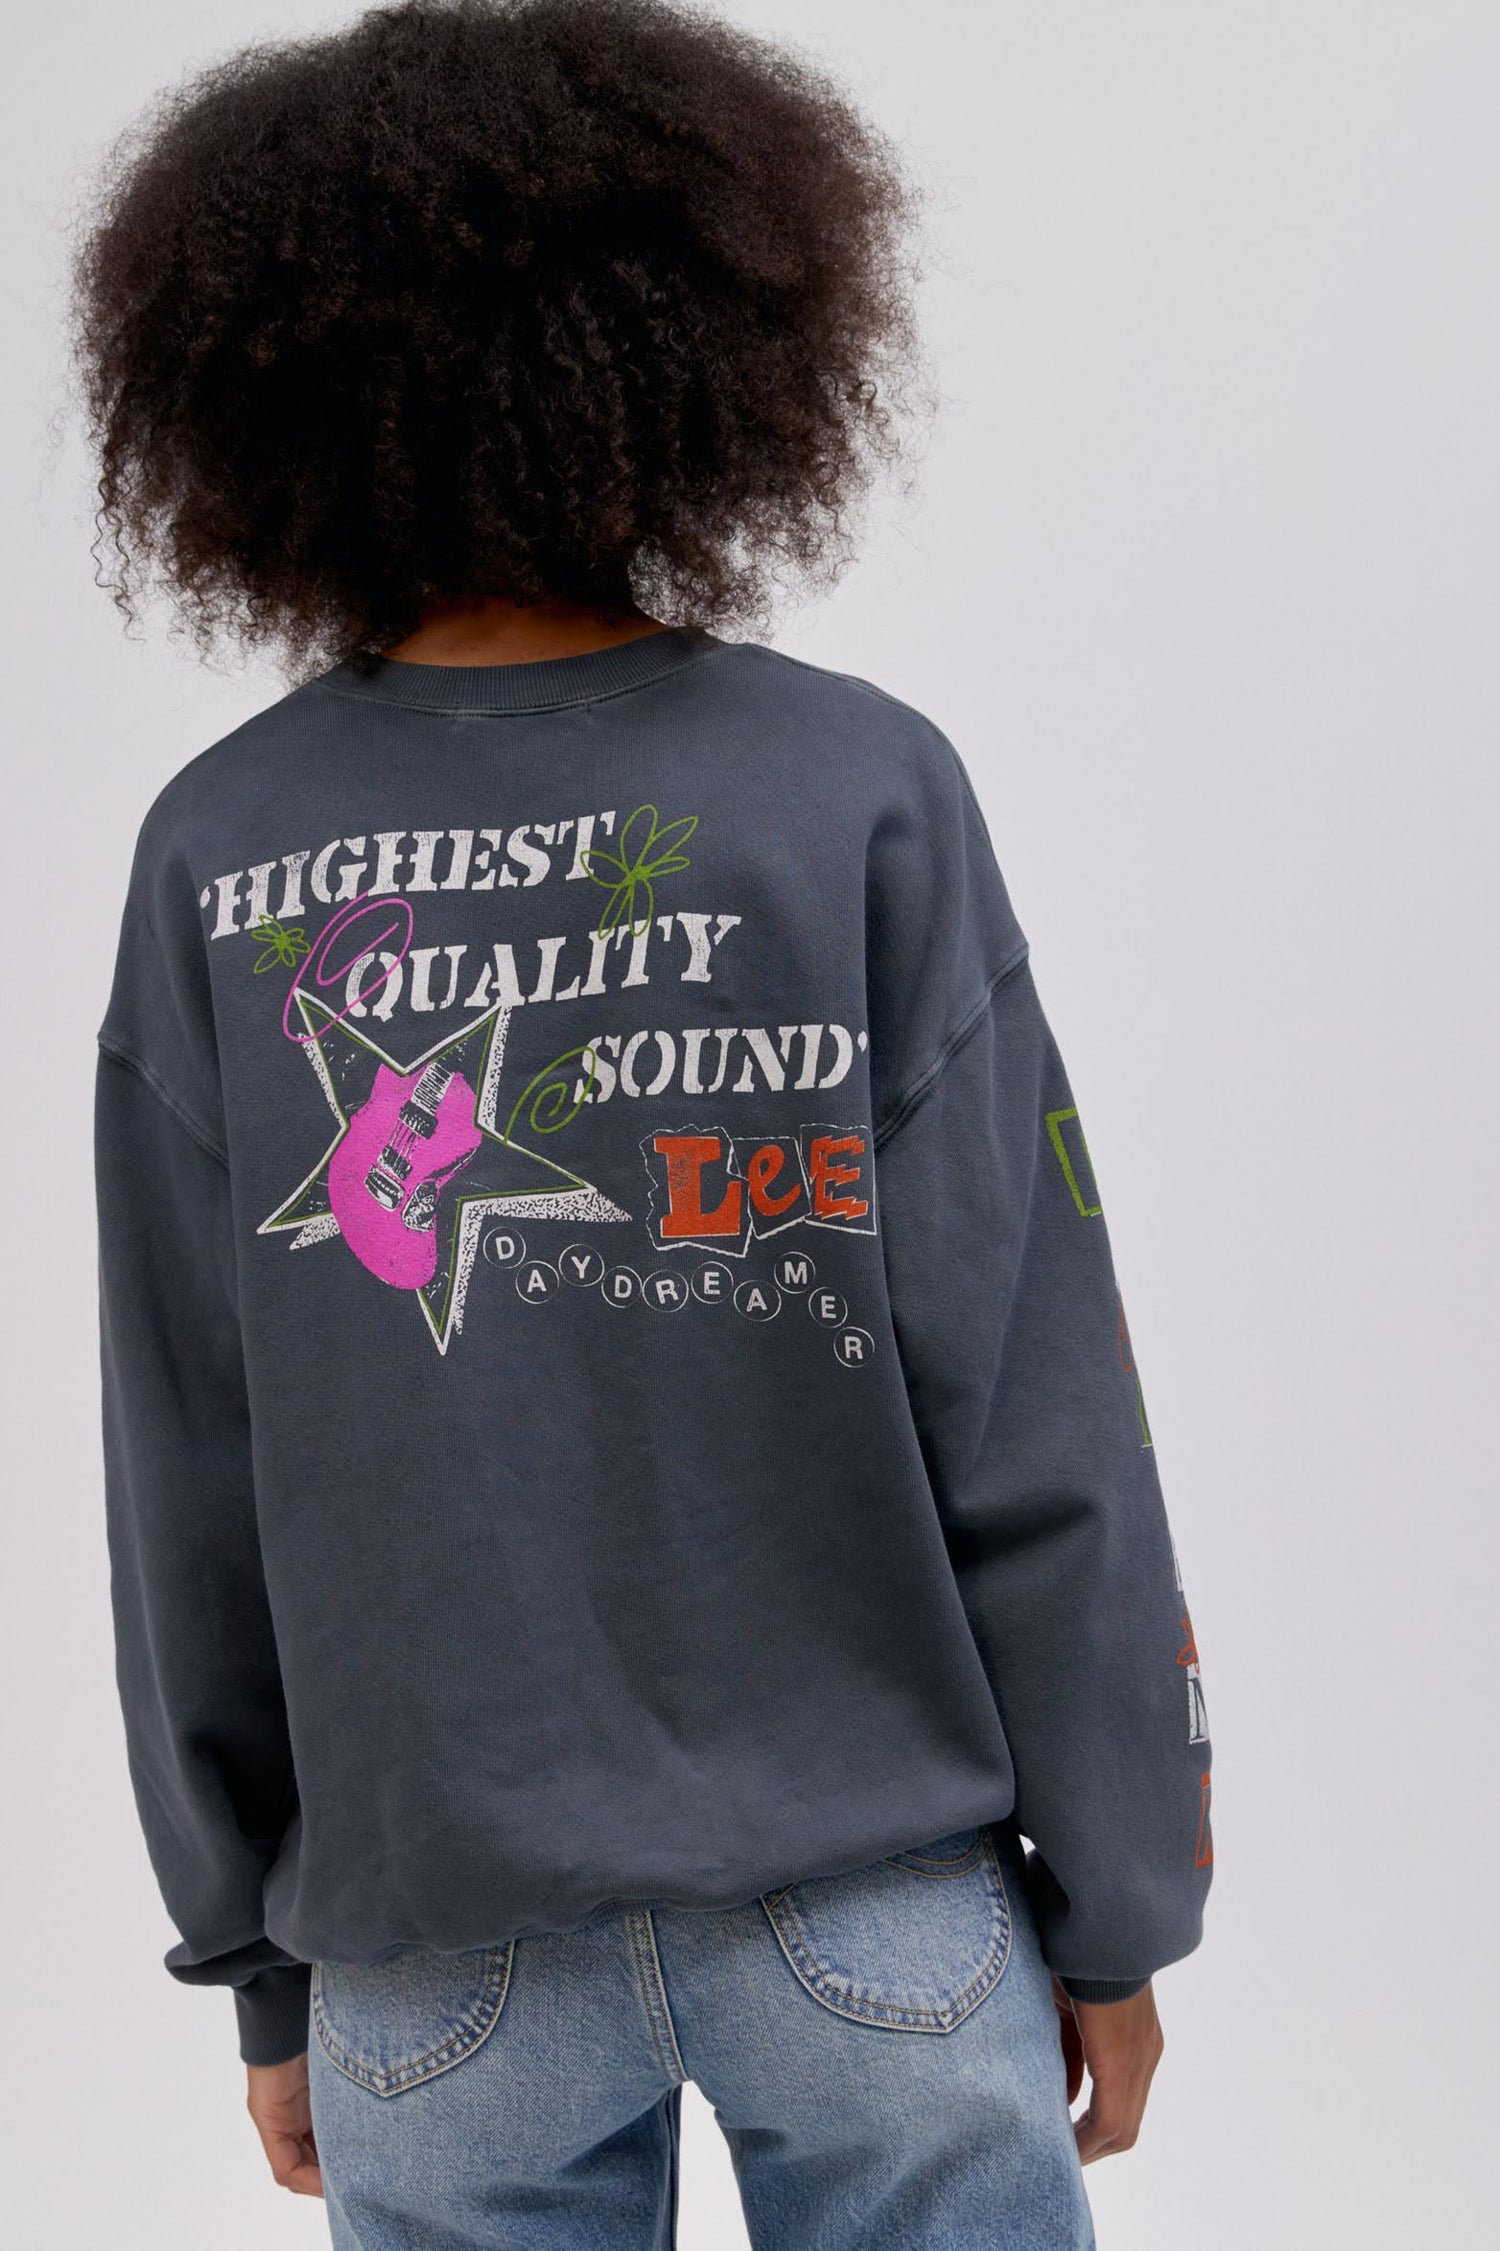 Backside of curly haired model wearing a Lee x Daydreamer collab graphic sweatshirt in washed black.